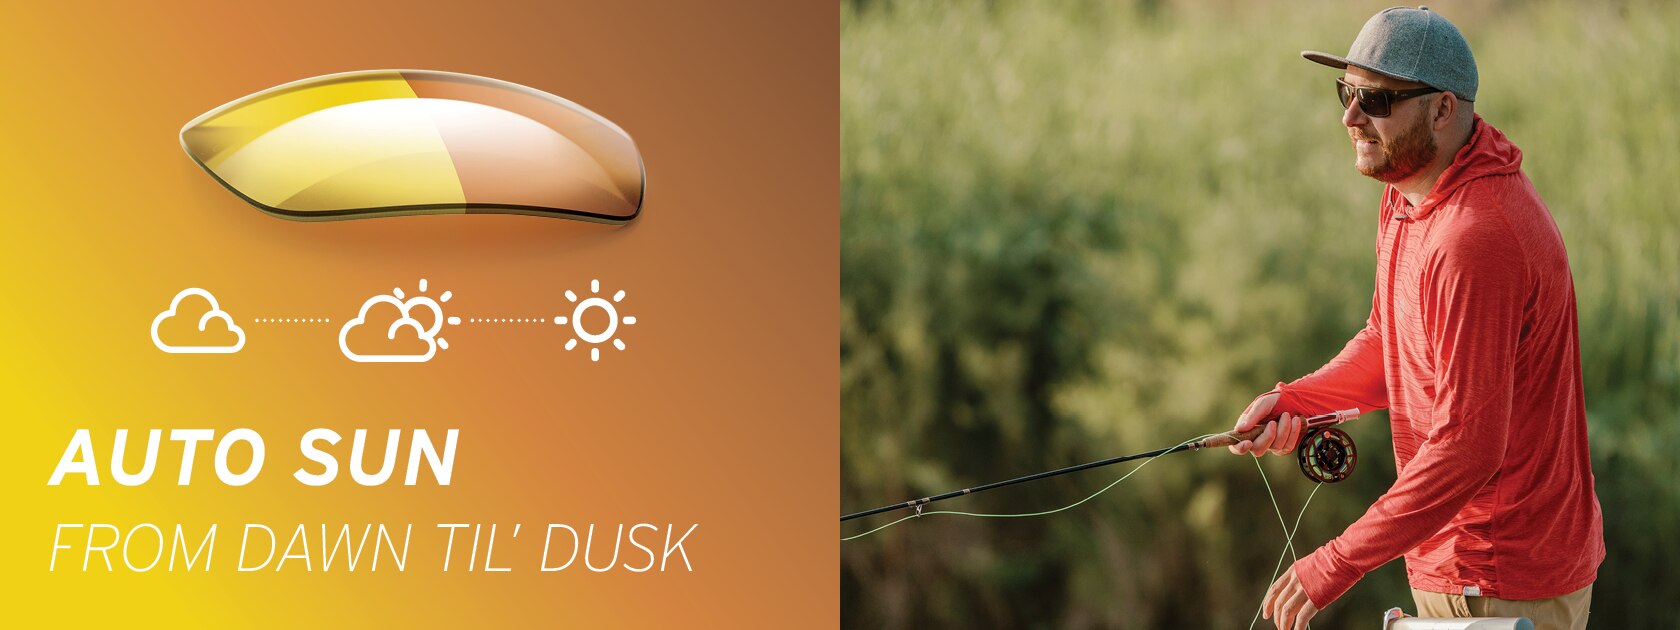 auto sun icon next to photo of man flyfishing with grassy bank background